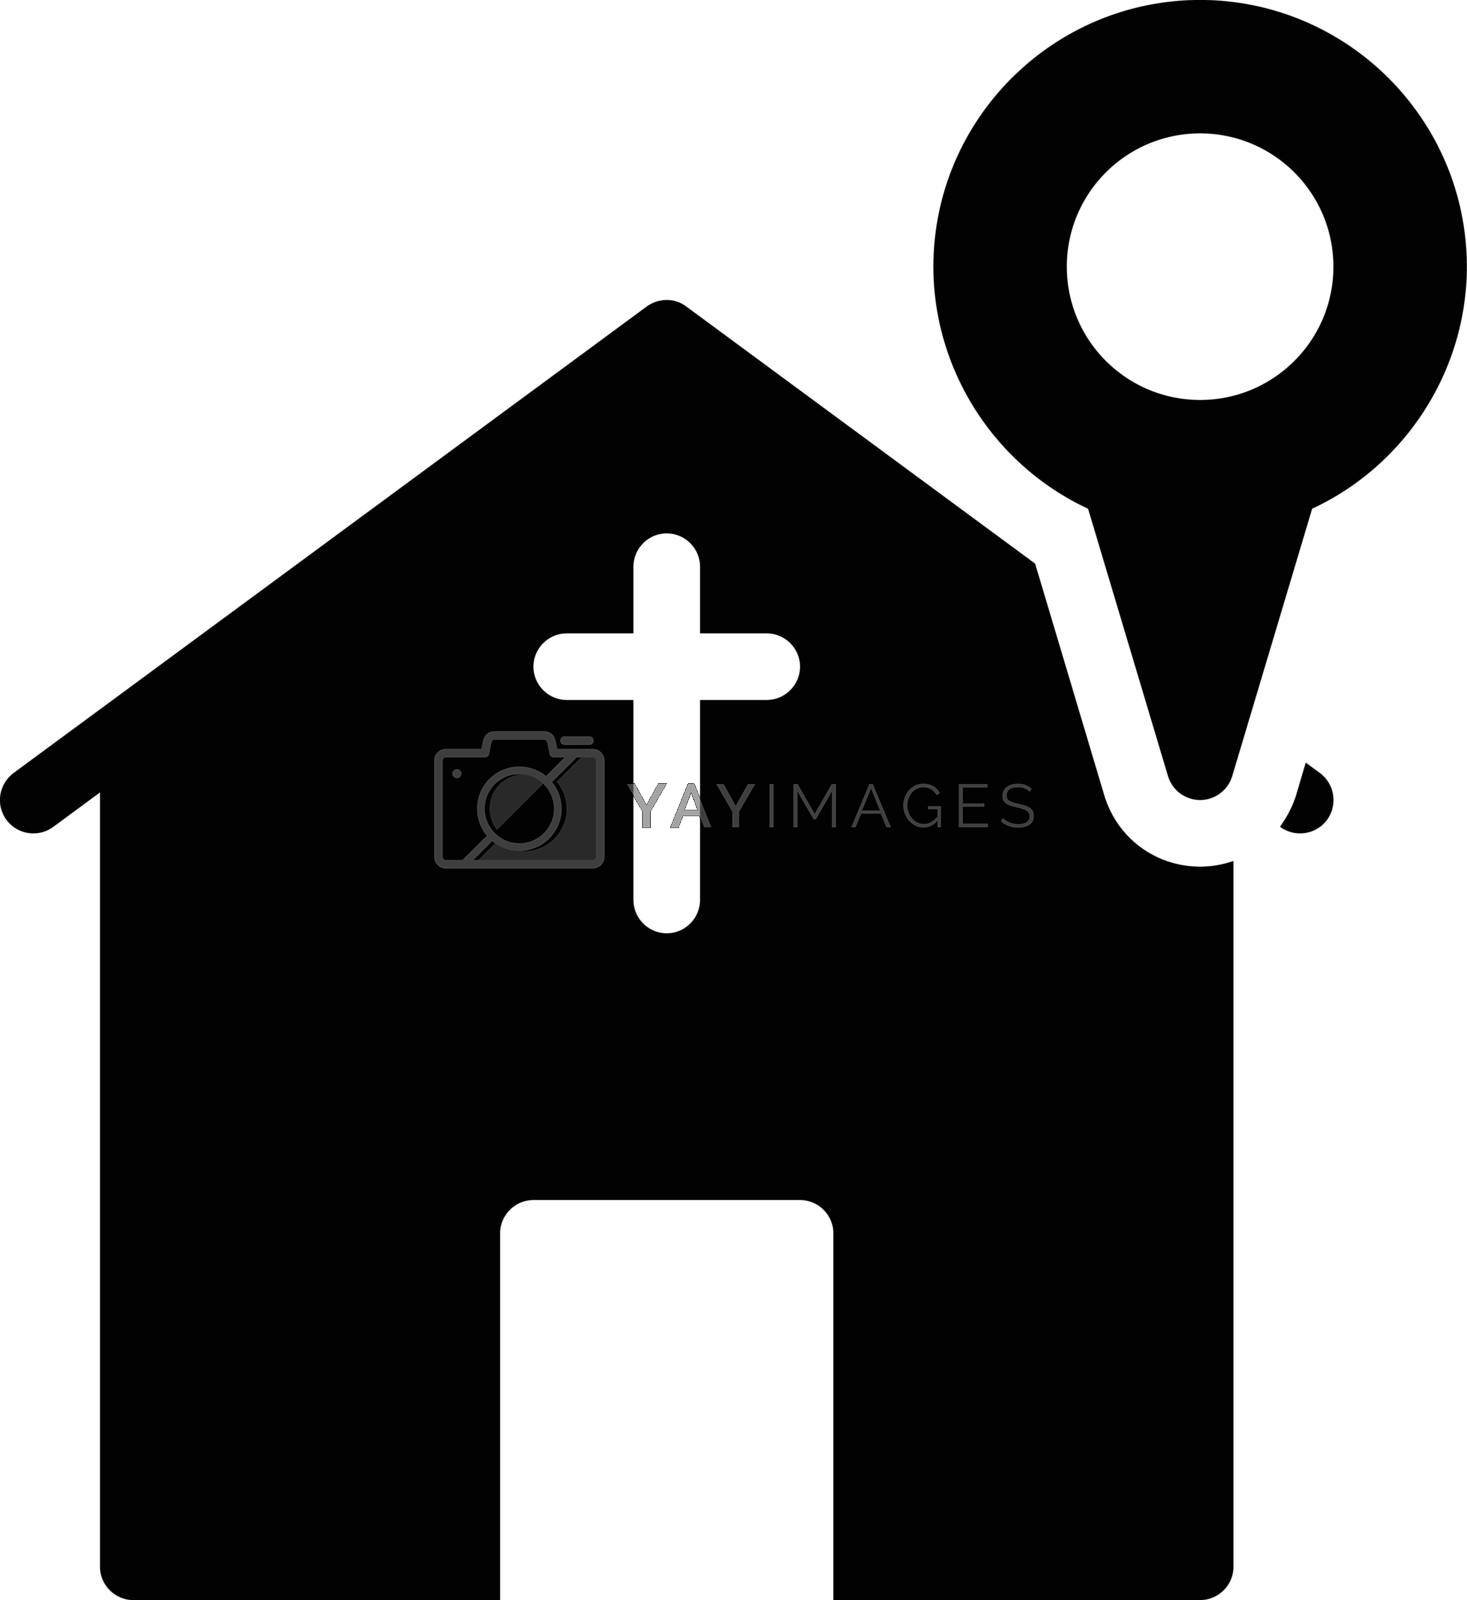 Royalty free image of Church location by vectorstall